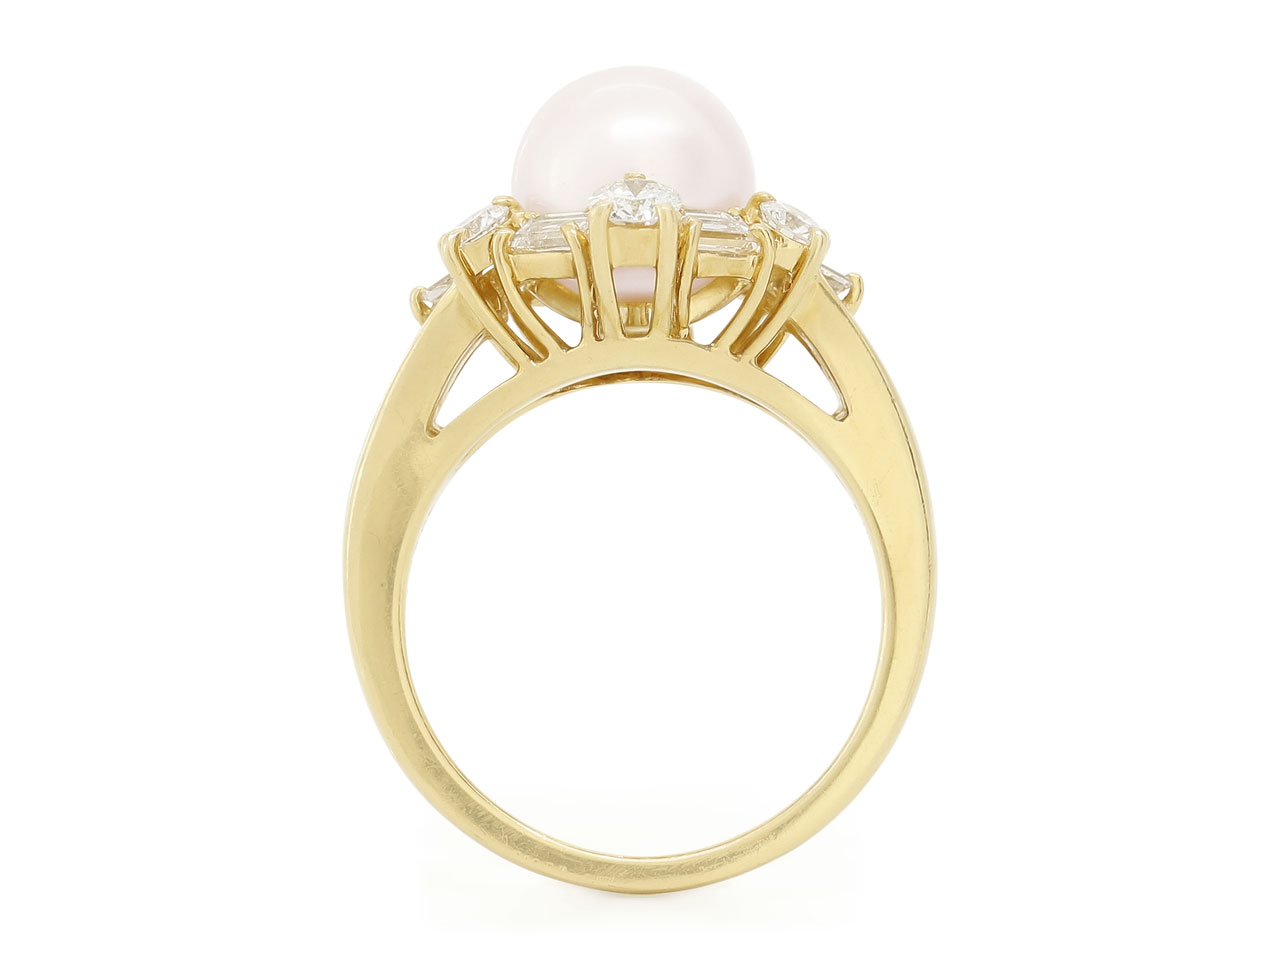 Mikimoto Pearl and Diamond Ring in 18K Gold